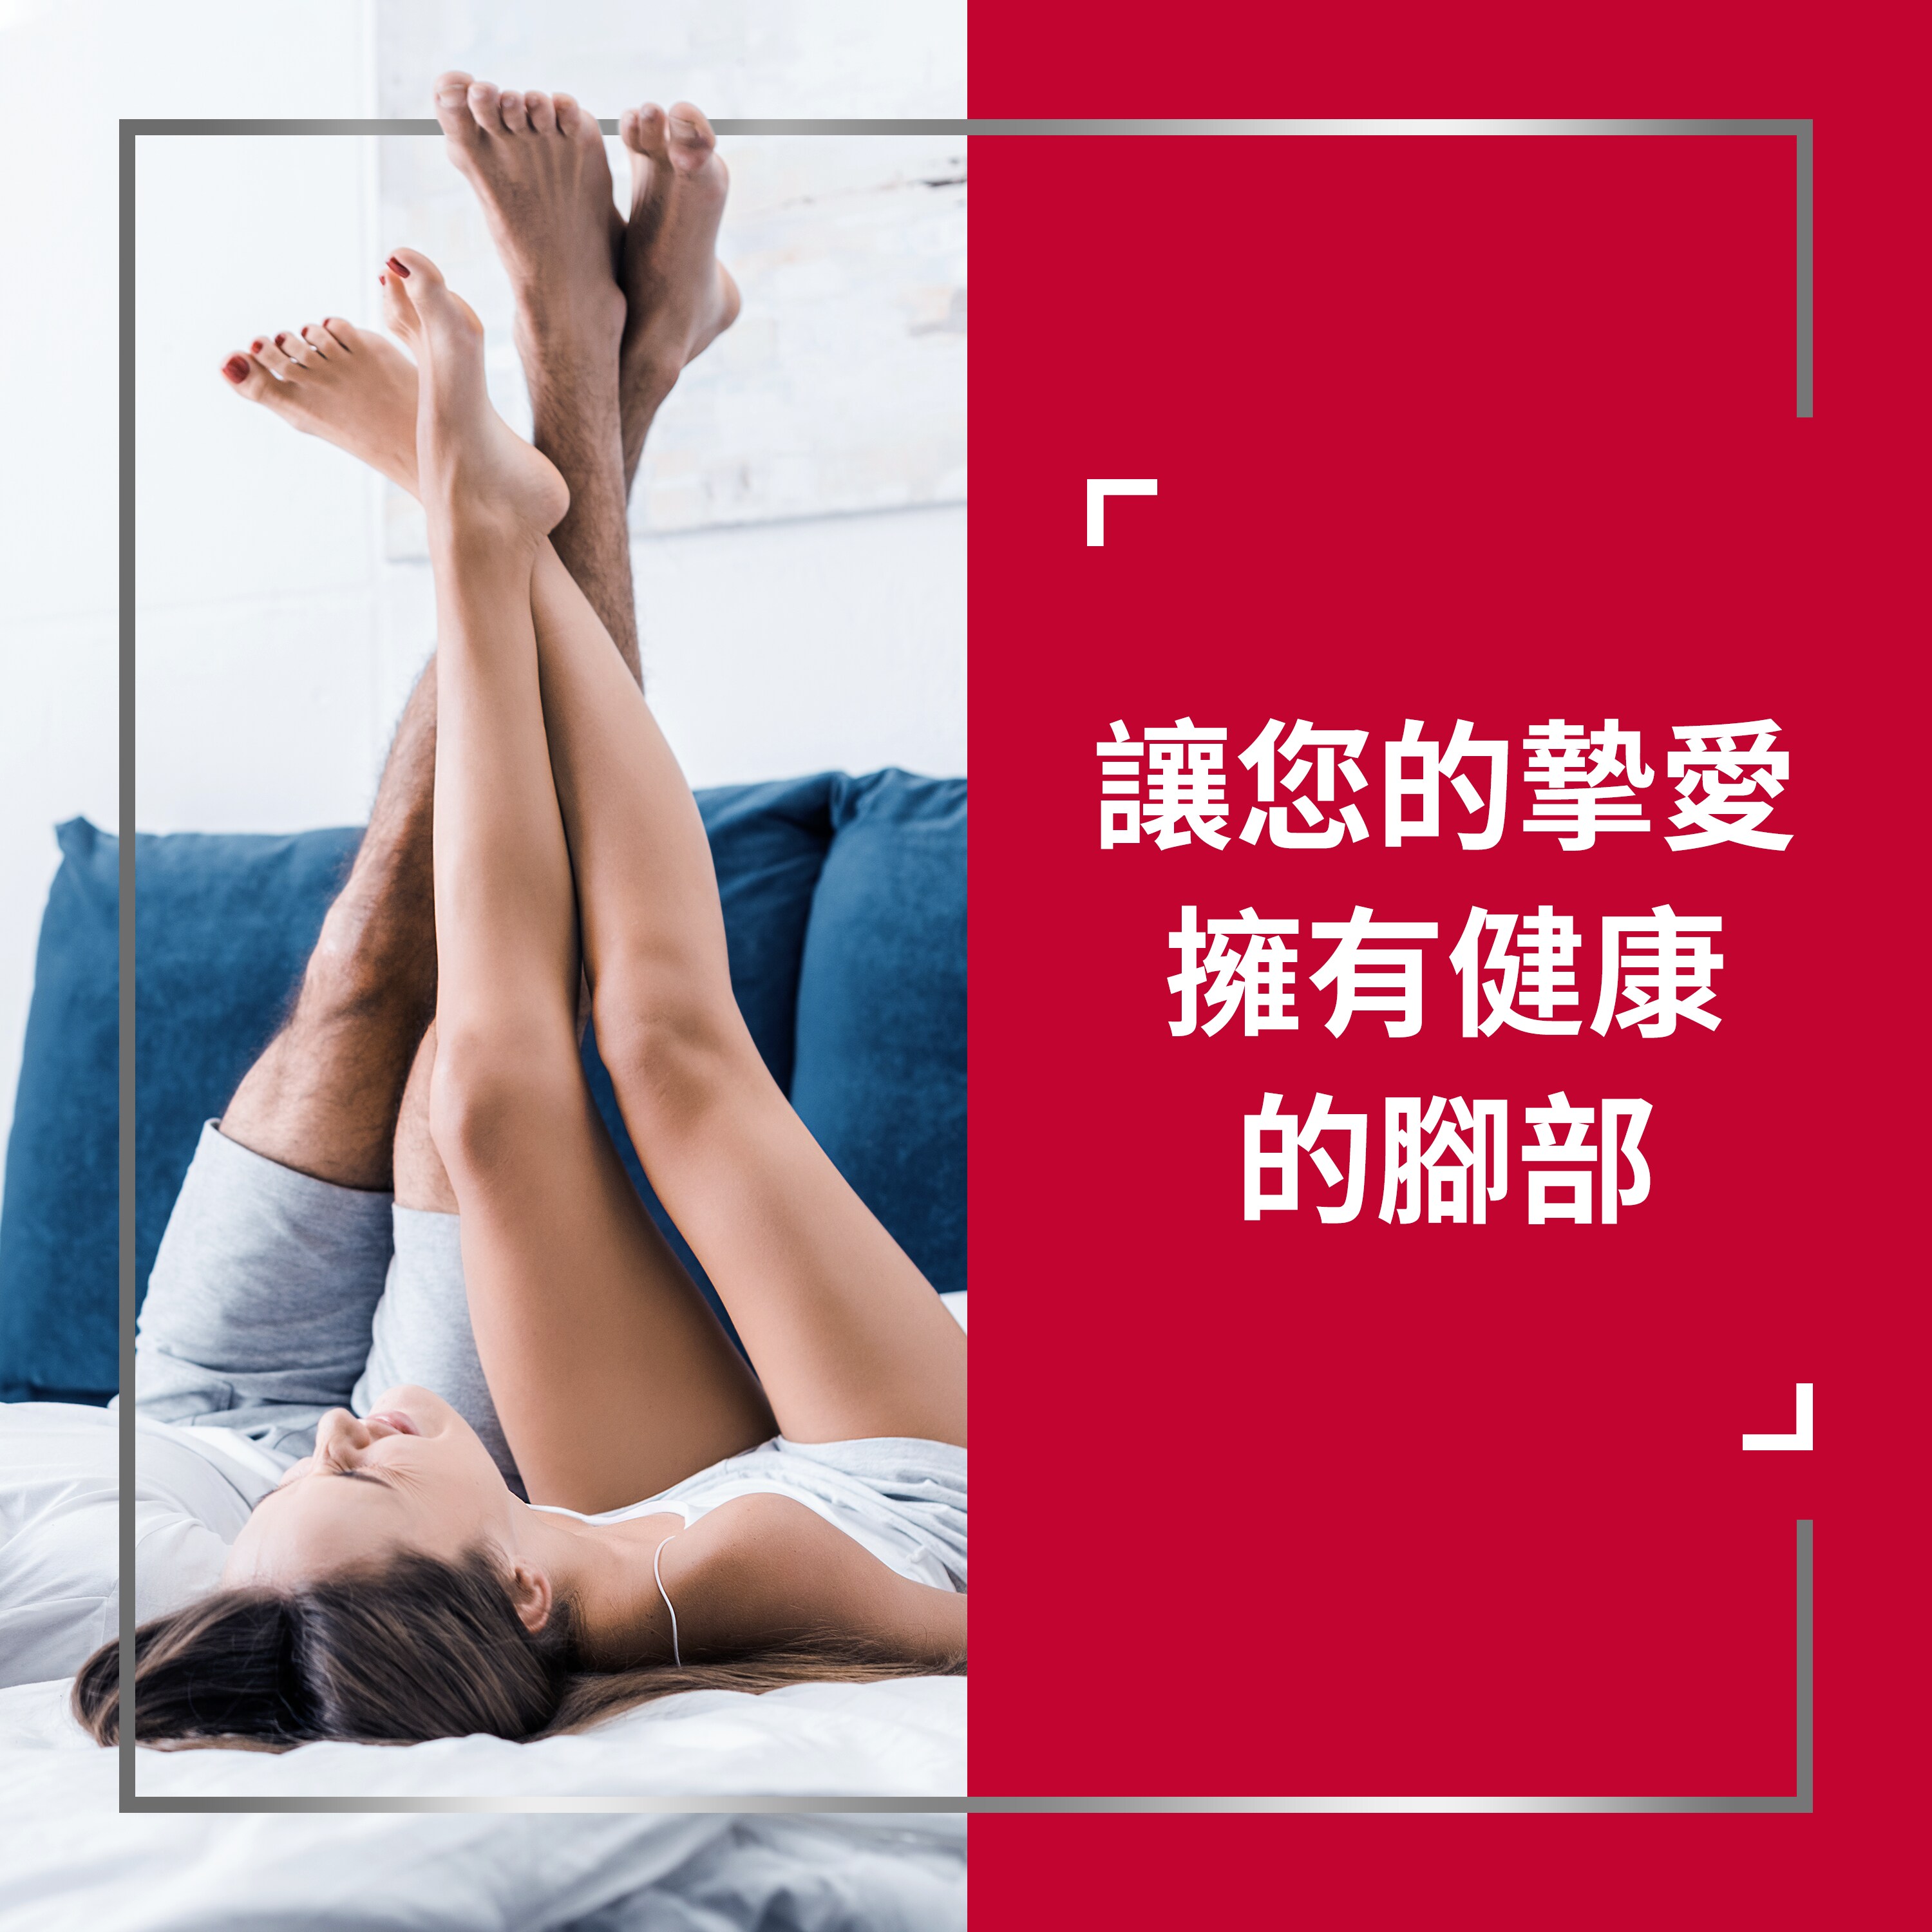 Couple lying on bed with crossed legs up and smiling, with caption to the right: Help all the feet you love stay healthy 